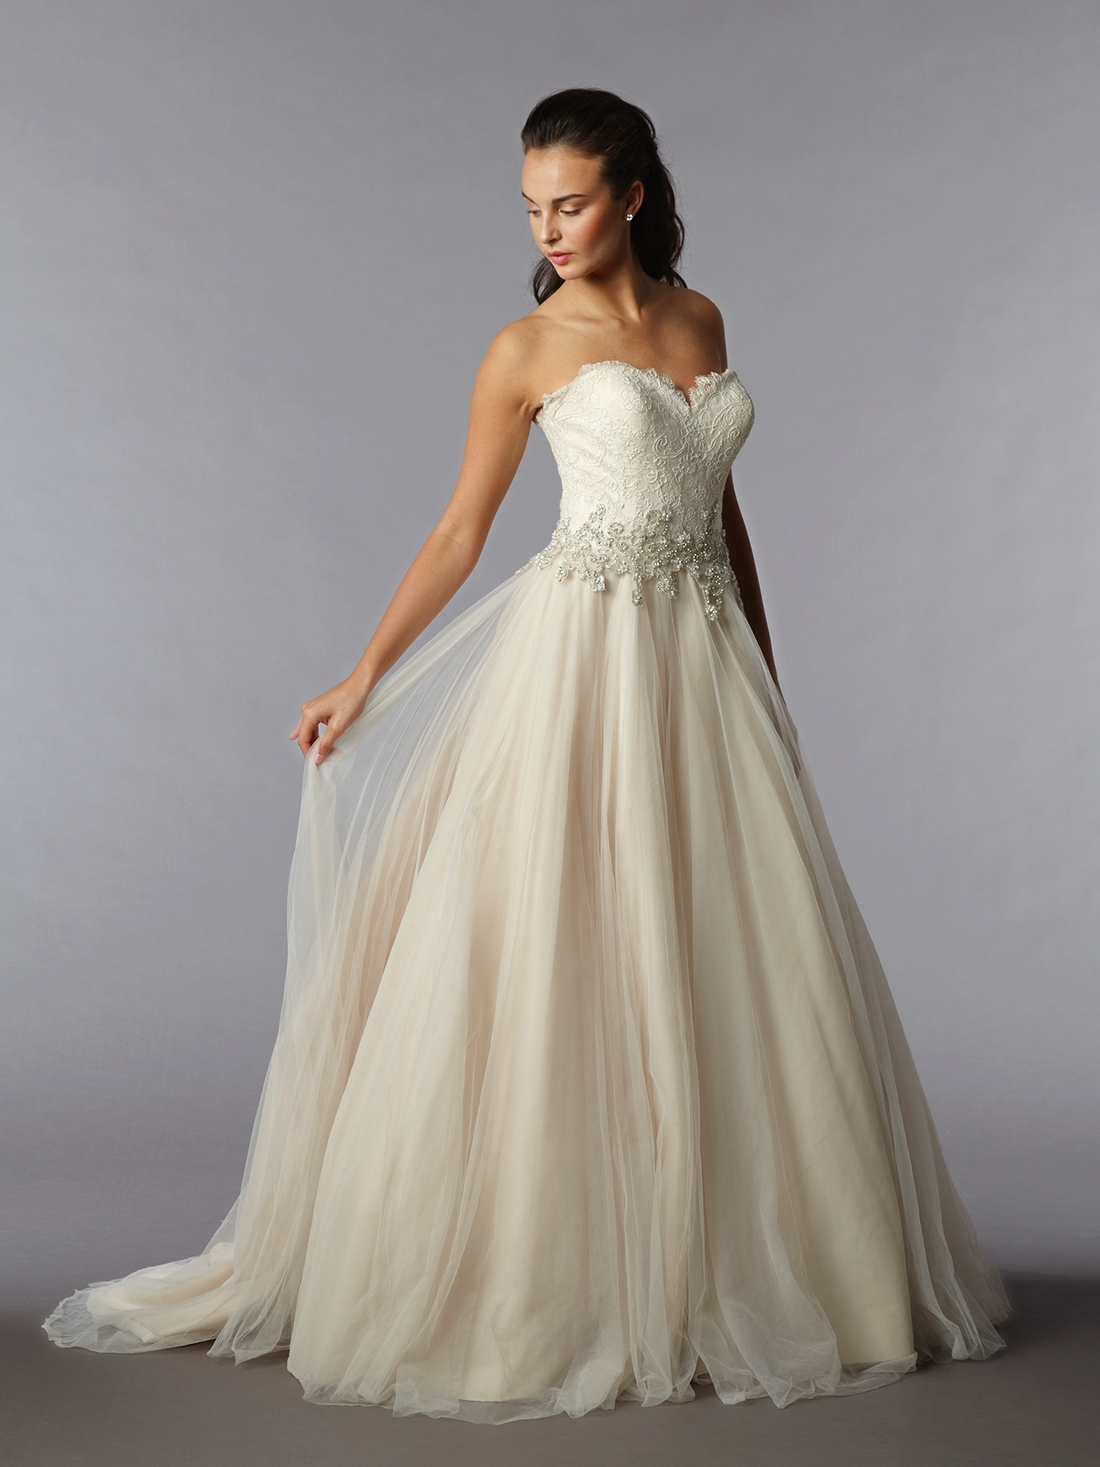 Sweetheart Princess Ball Gown Wedding Dress with Natural Waist in Tulle